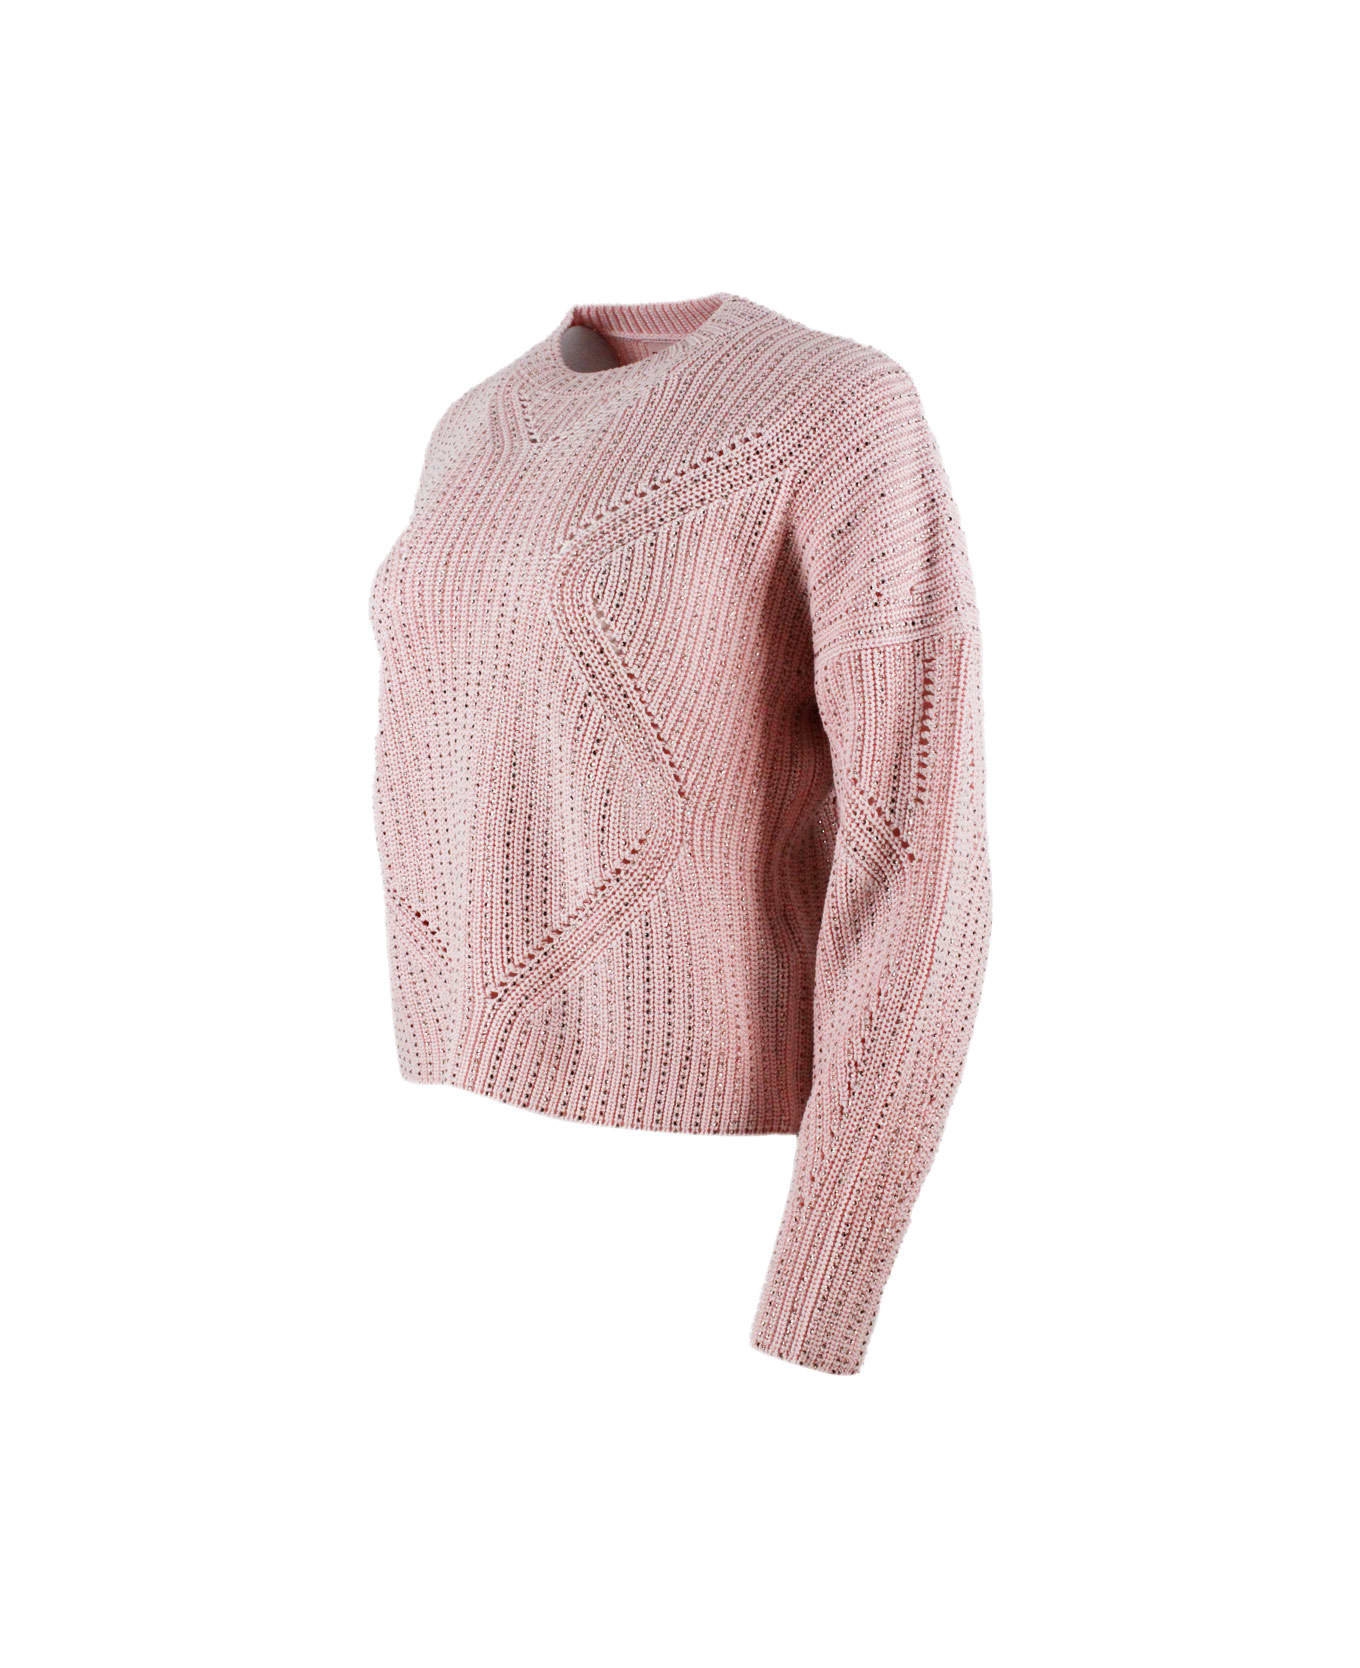 Ermanno Scervino Long-sleeved Crew Neck Sweater In Cotton With Crystals - Pink